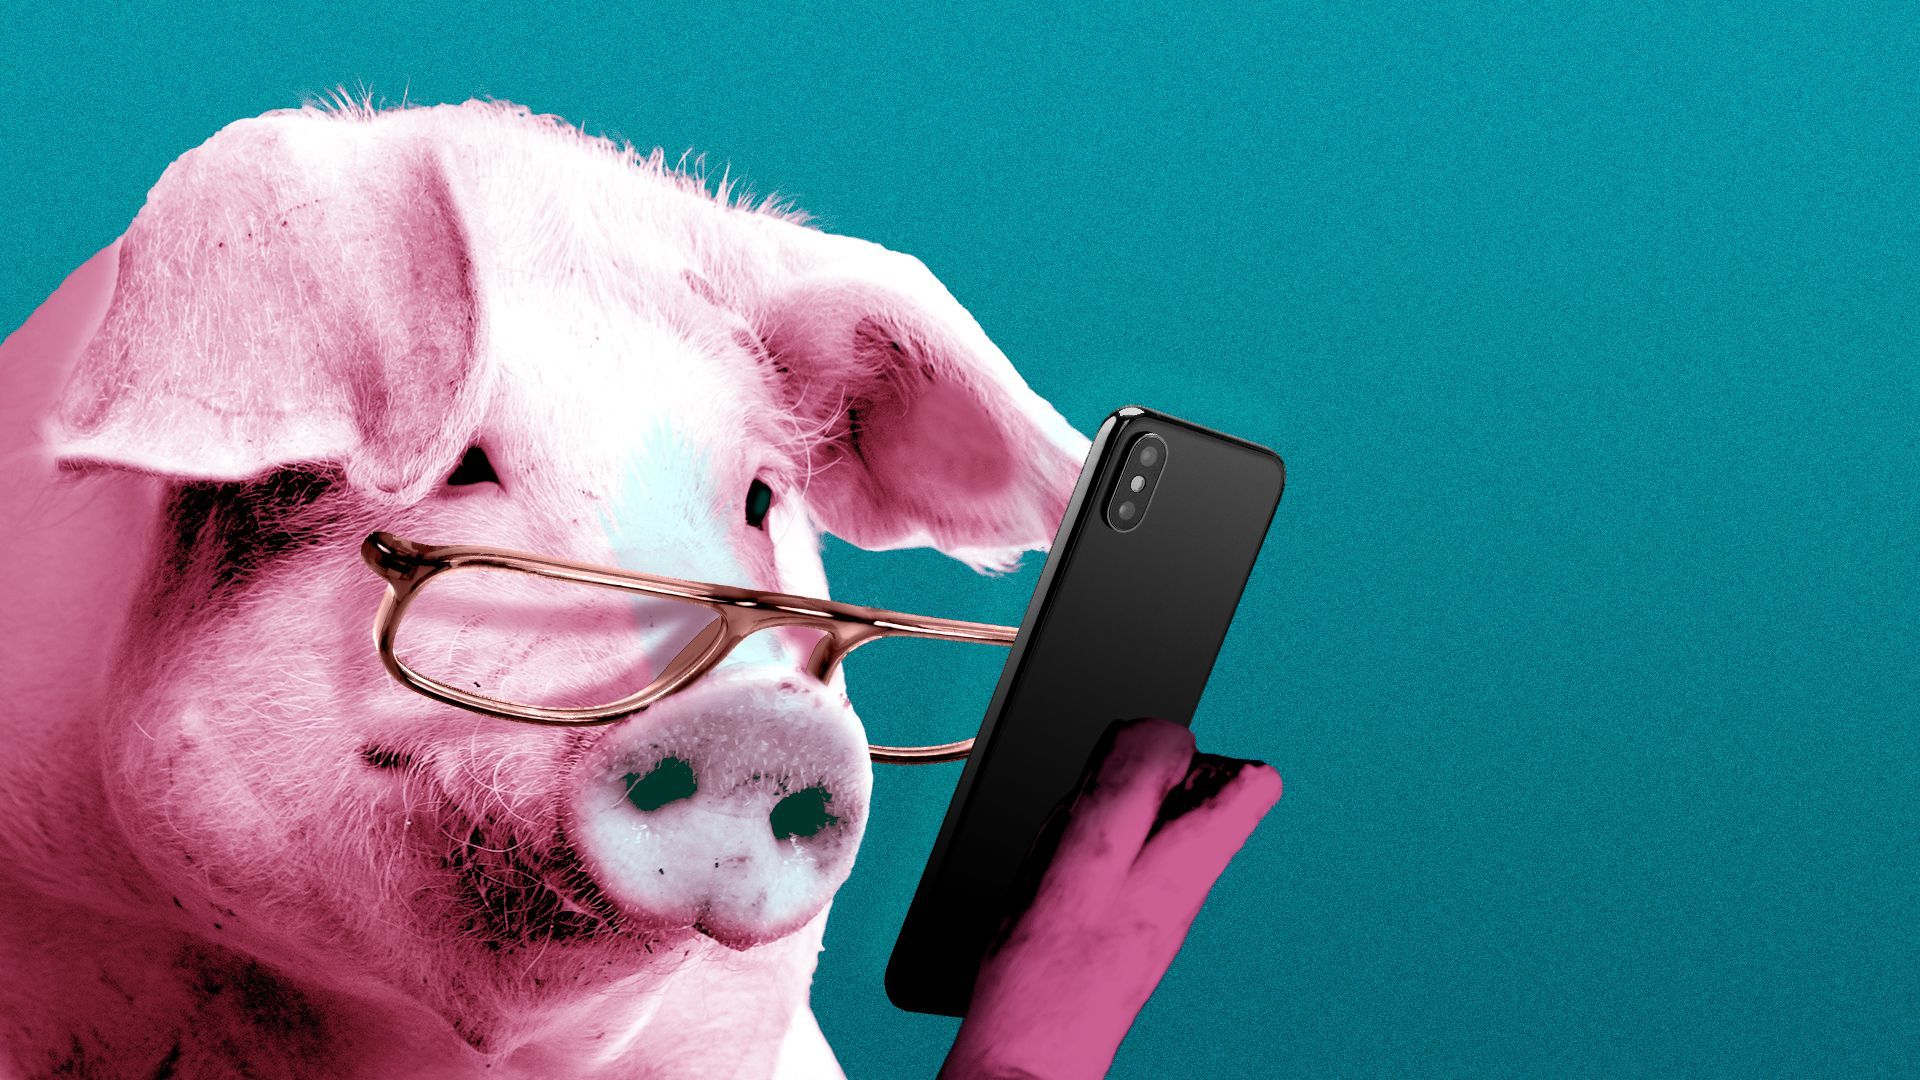 Illustration of a pig wearing glasses and reading the news on its phone.